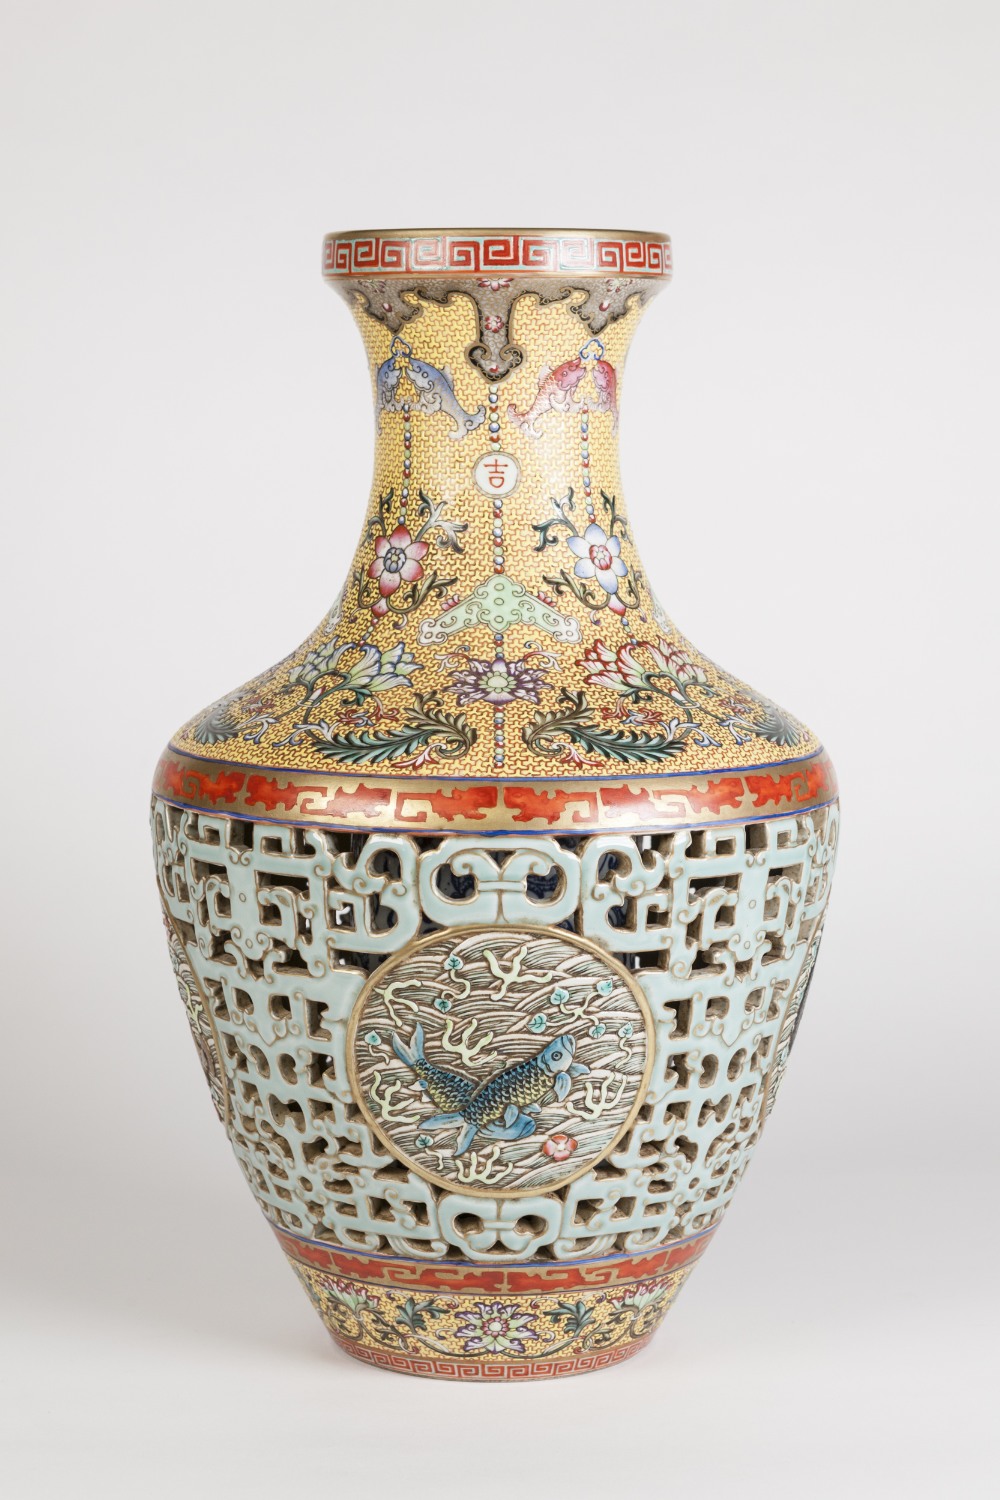 A FINE CHINESE PORCELAIN DOUBLE WALLED RETICULATED VASE, THE OVOID BODY PIERCED WITH PALE BLUE - Image 3 of 9